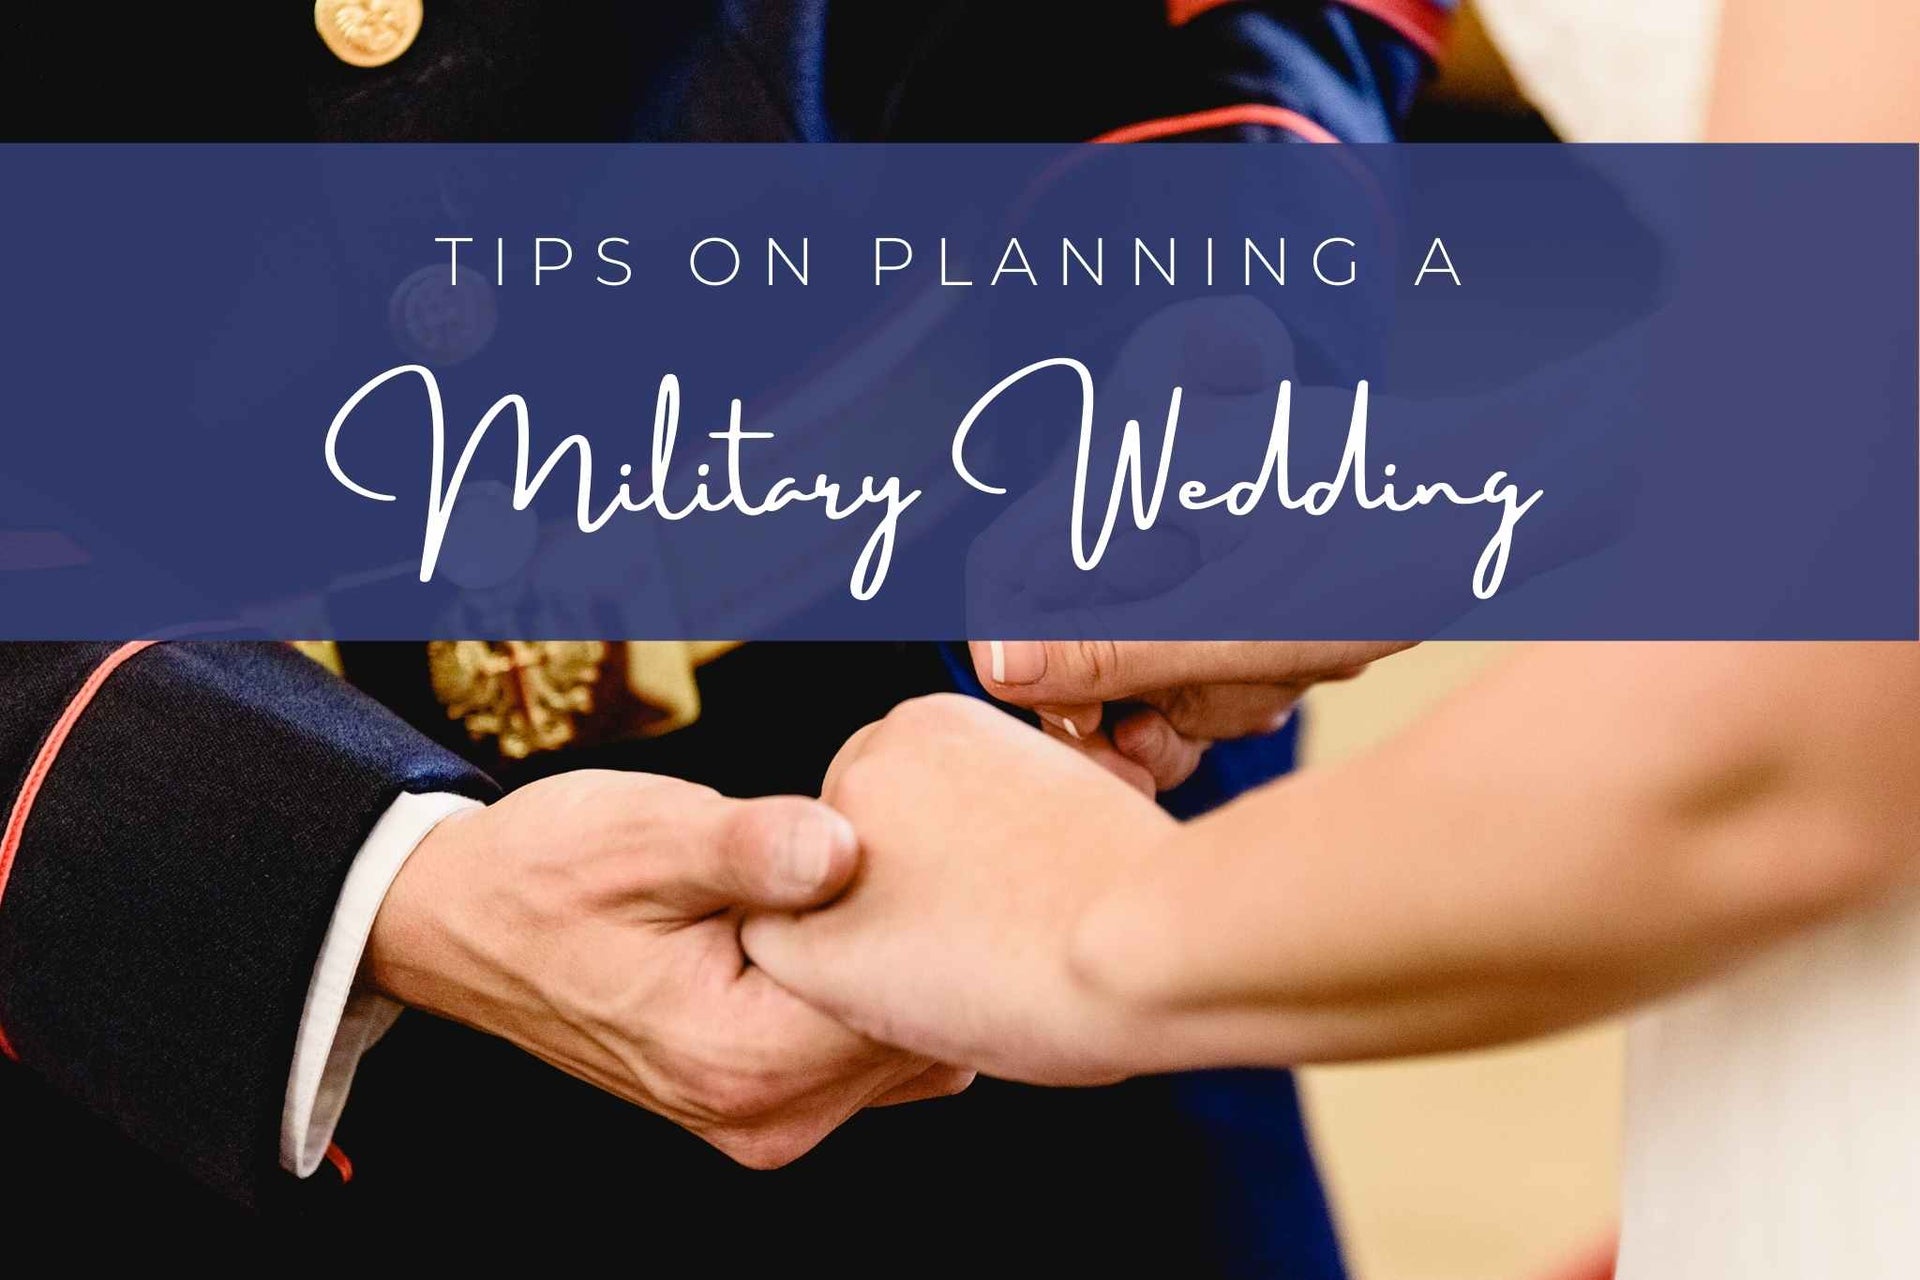 Tips on Planning a Military Wedding